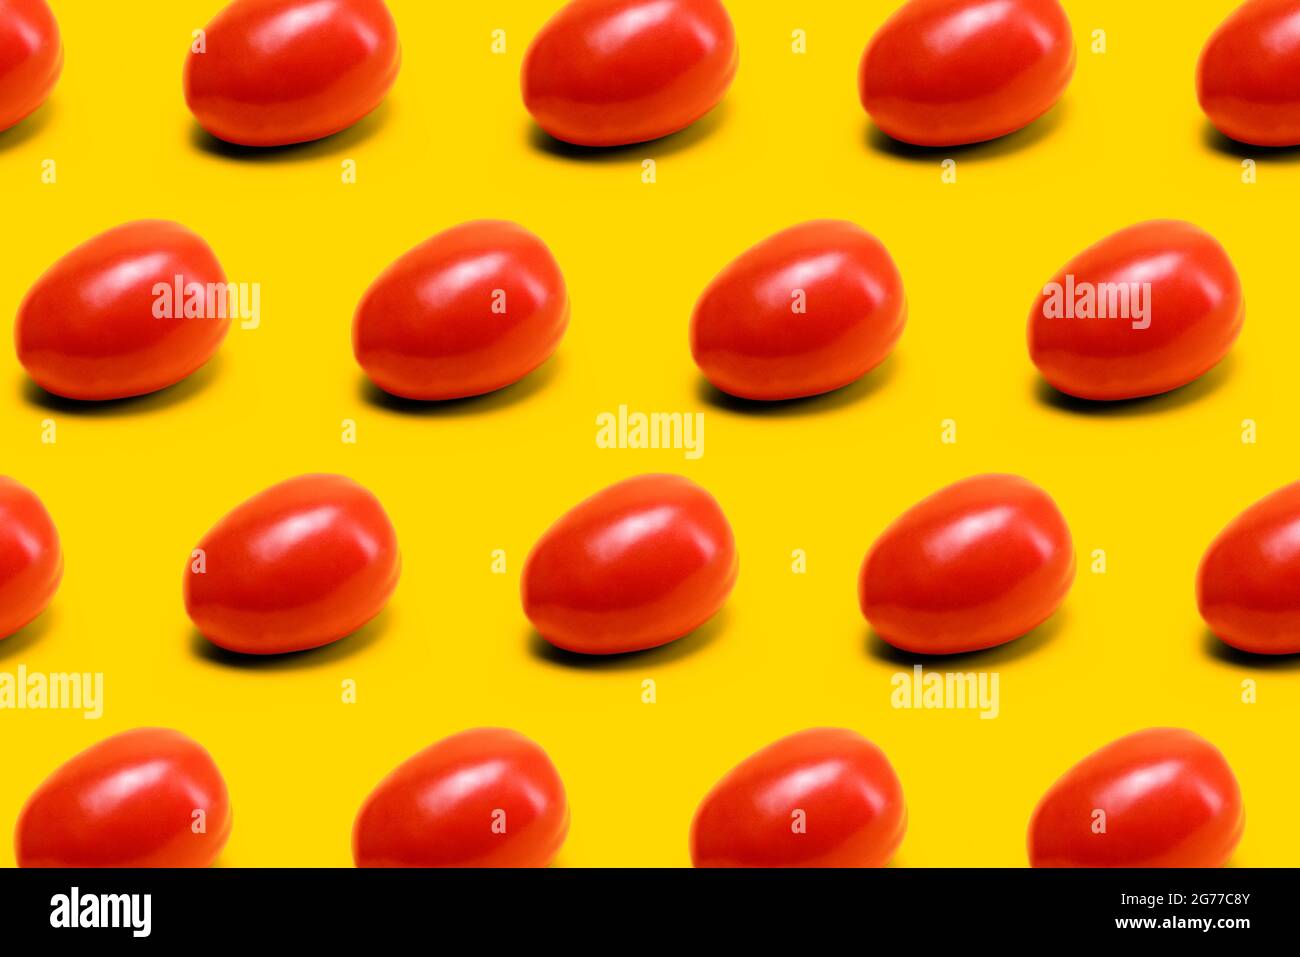 red mexican tomato, tomatoes pattern on yellow background Stock Photo